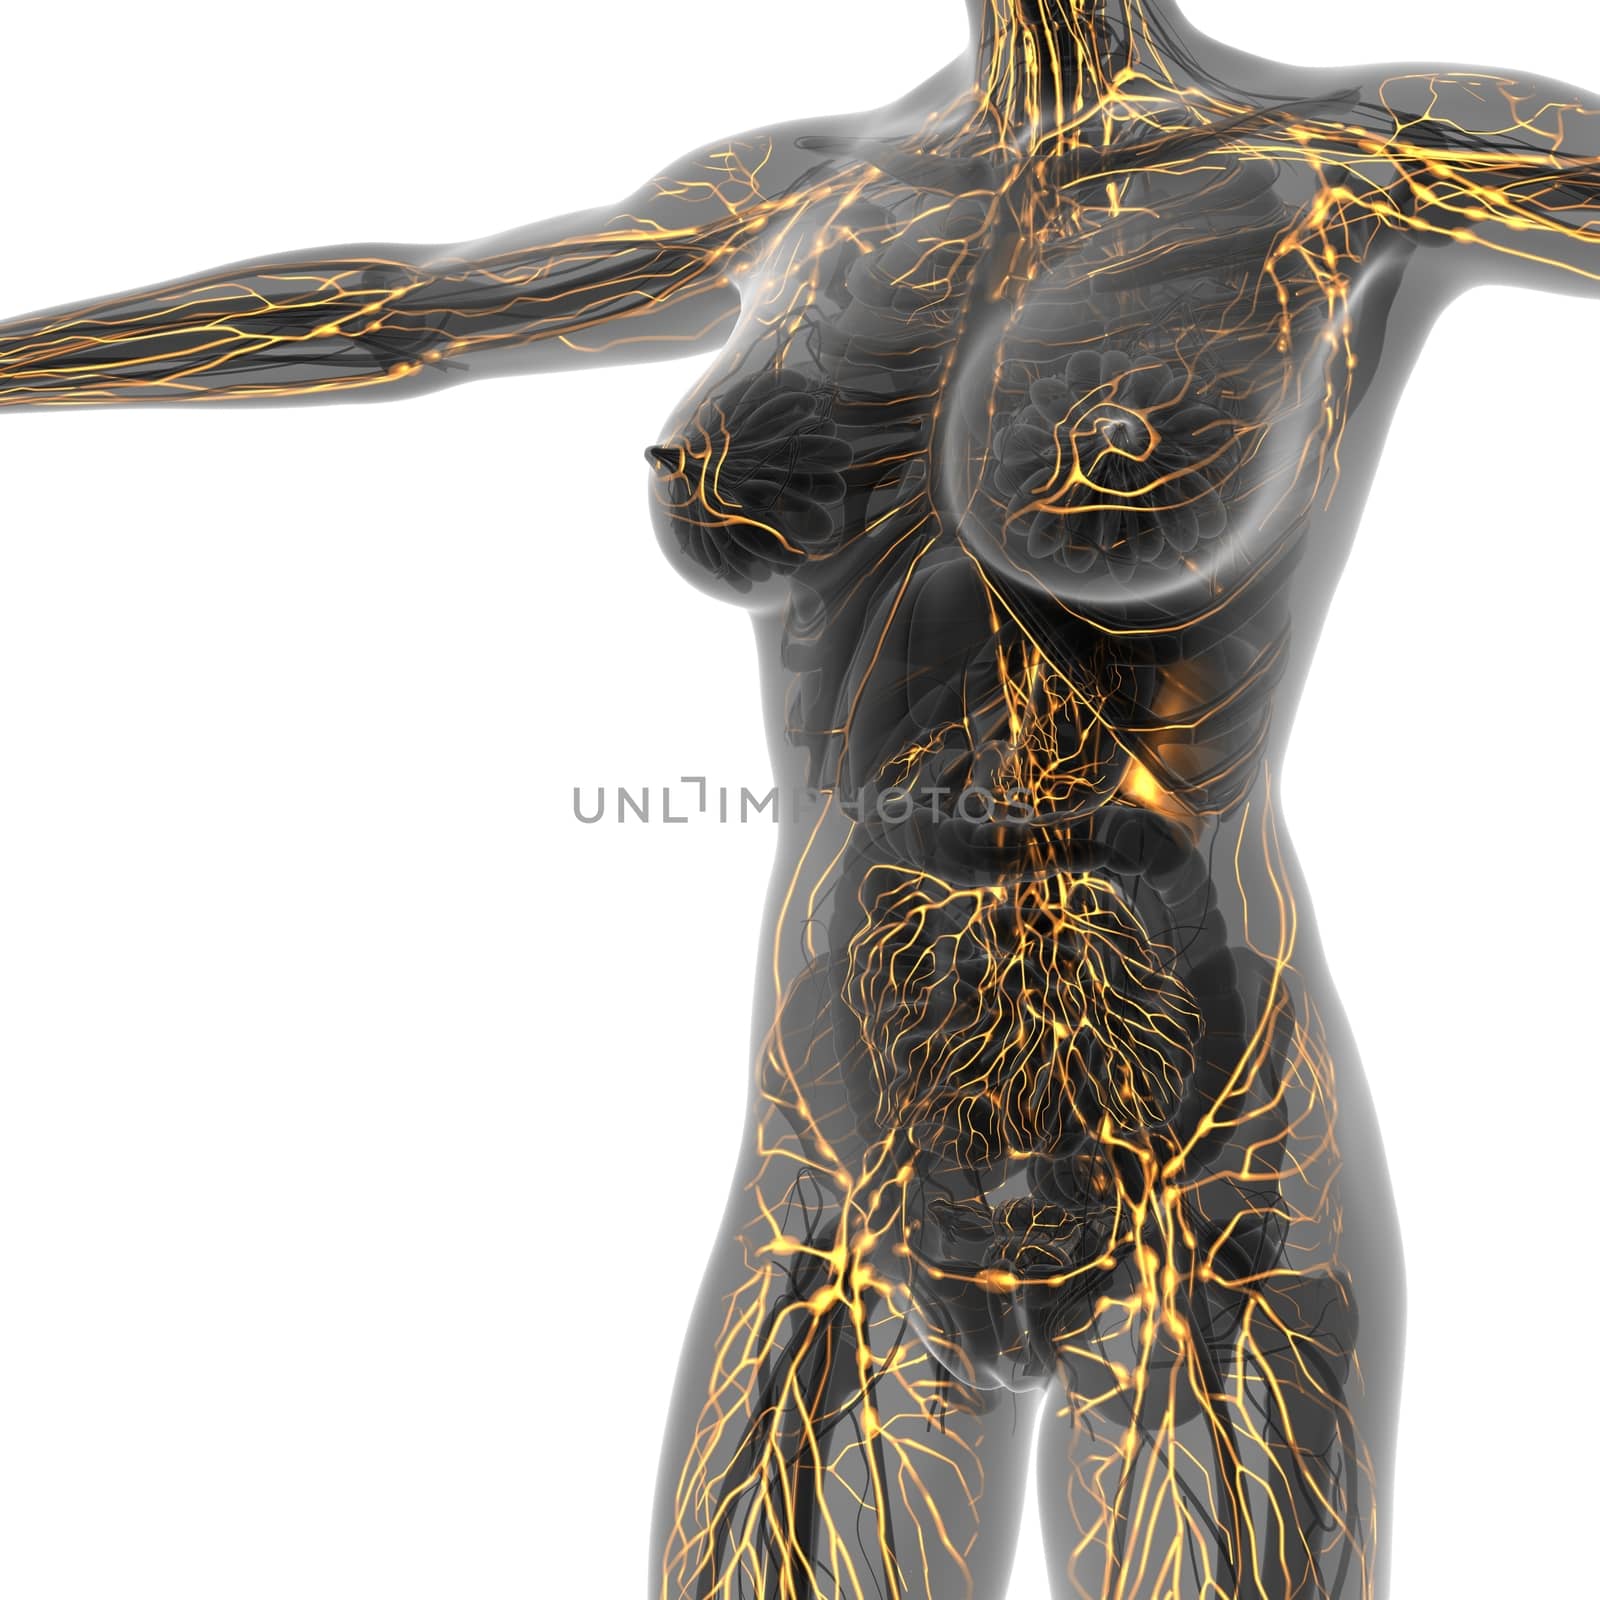 Human limphatic system with bones in transparent body by icetray